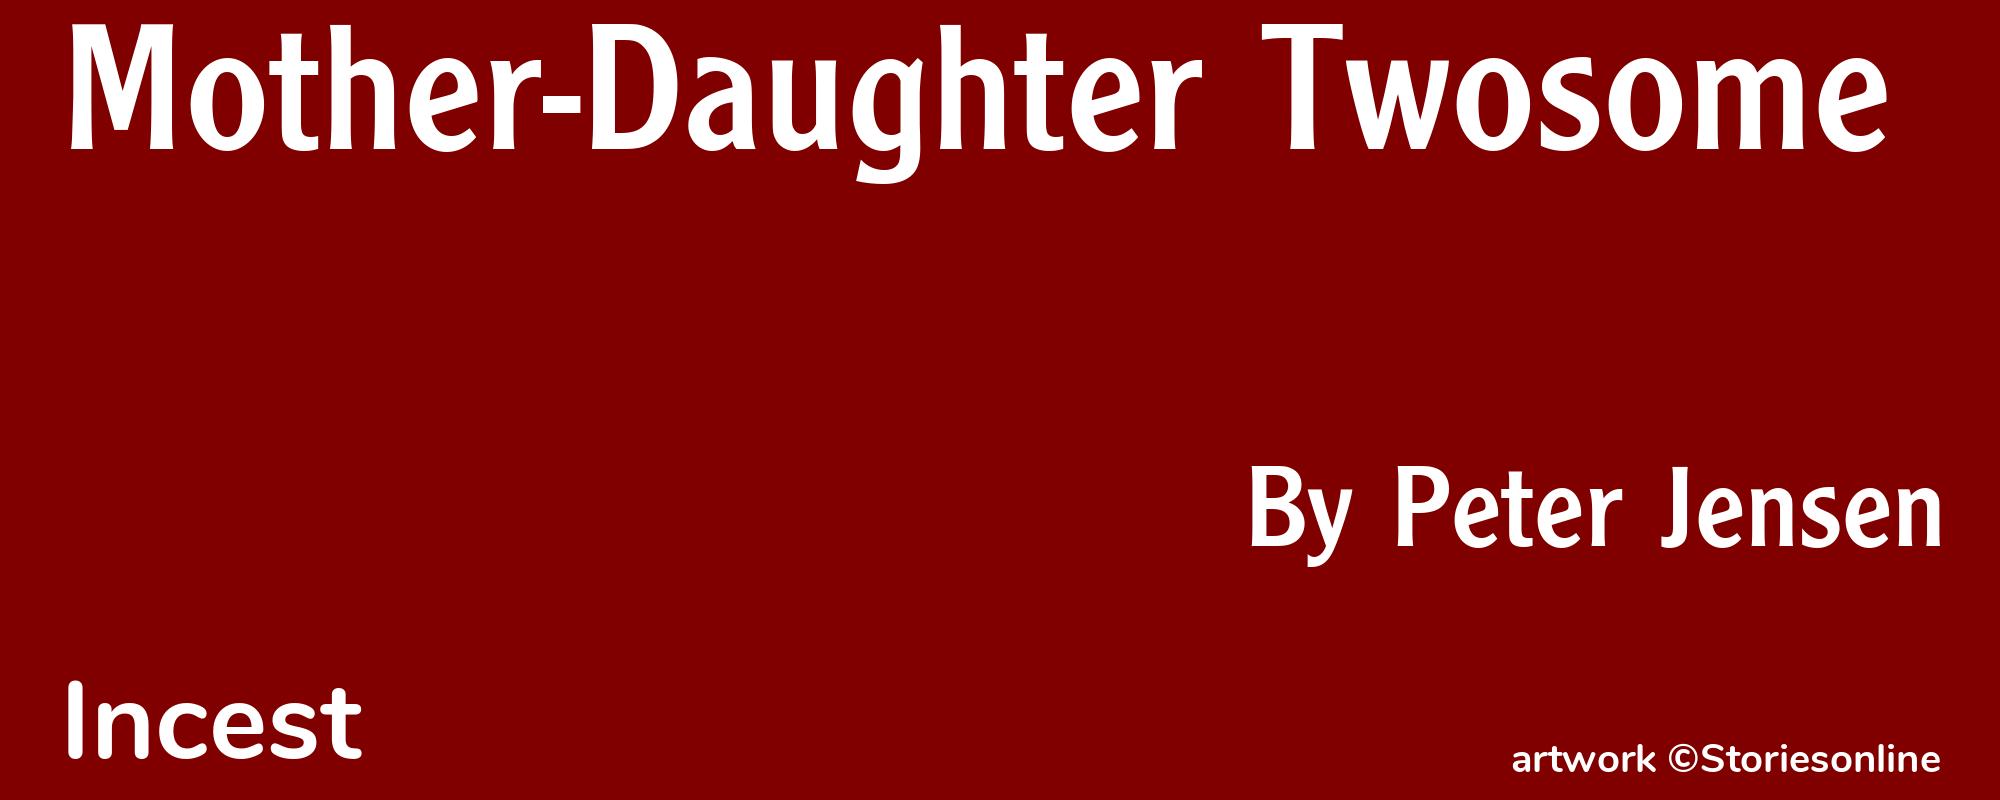 Mother-Daughter Twosome - Cover